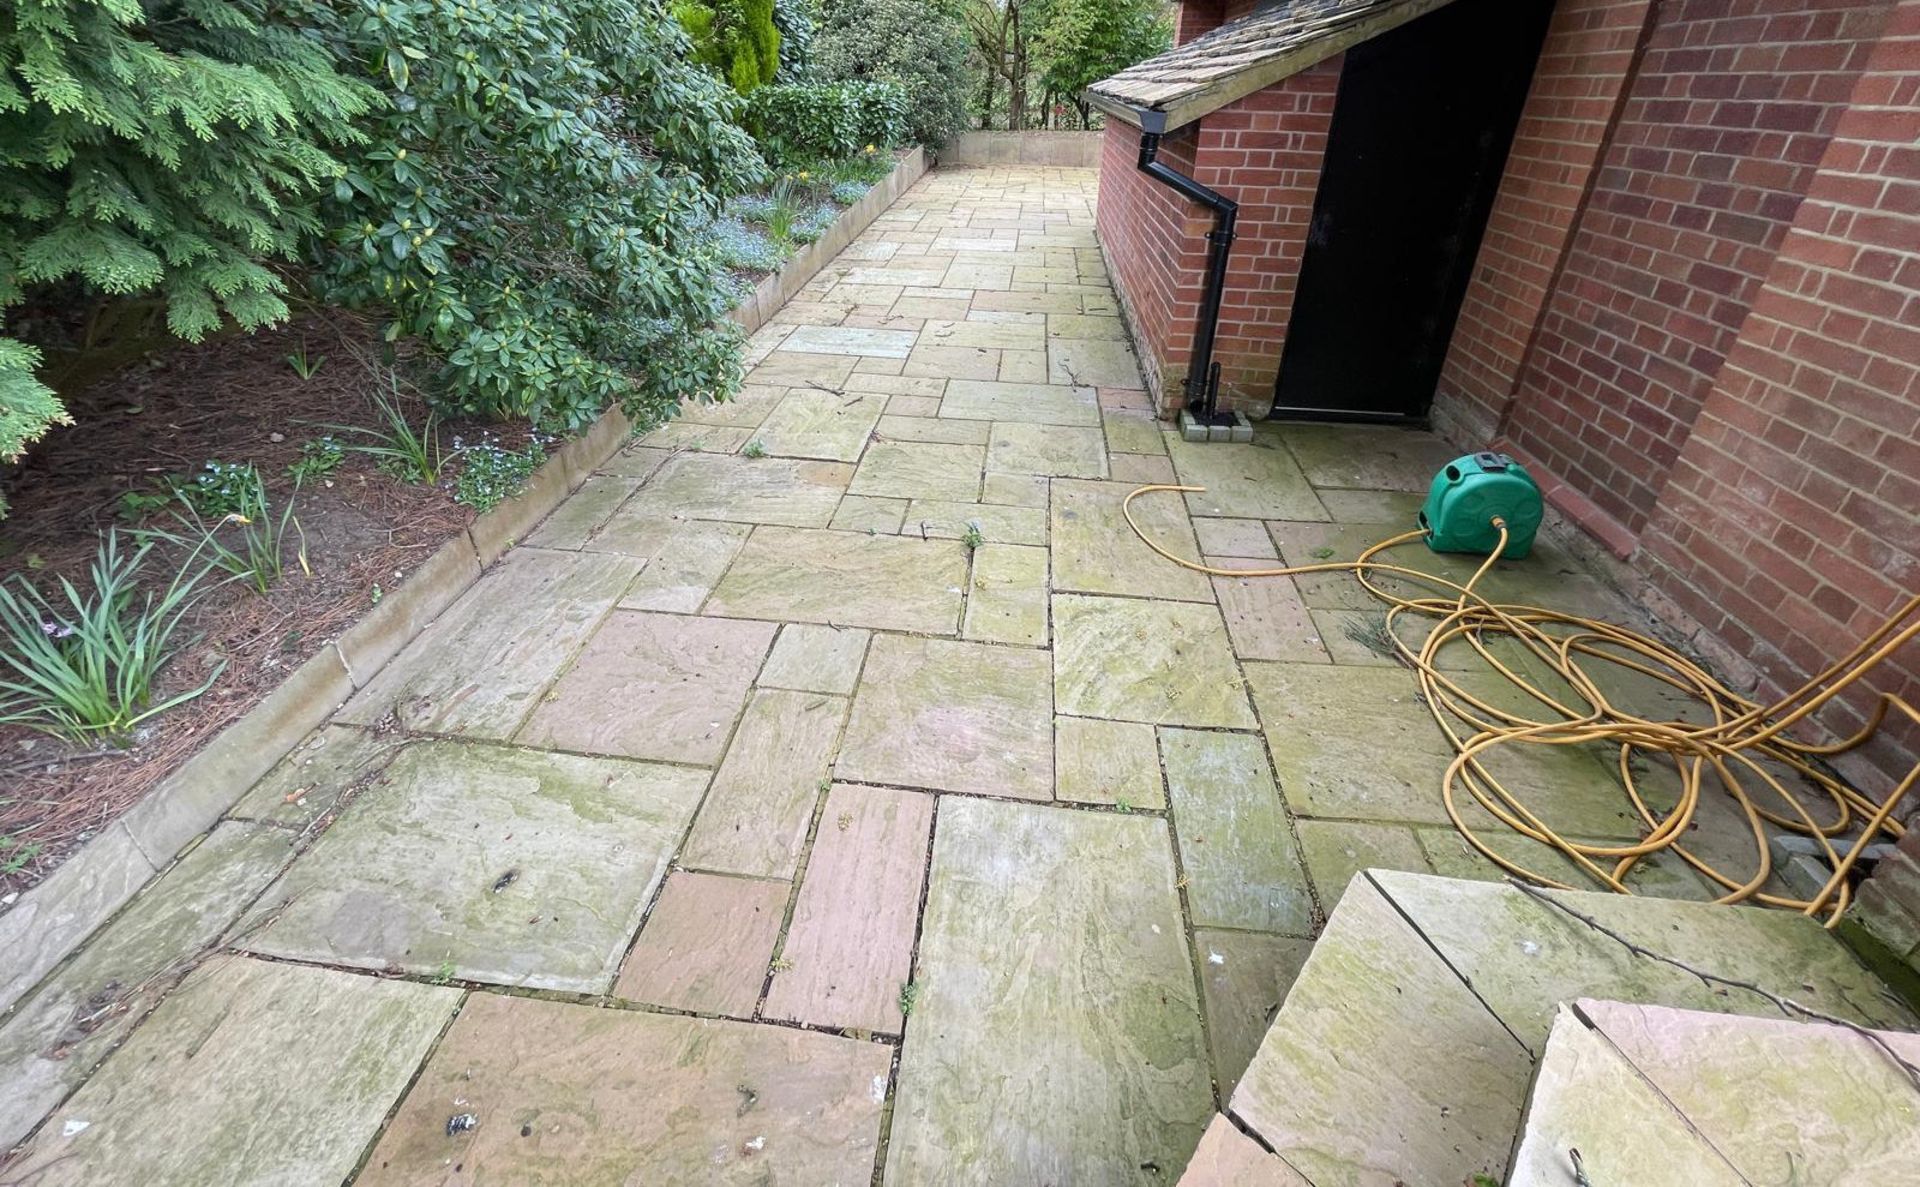 Large Quantity of Yorkstone Paving - Over 340sqm - CL896 - NO VAT ON THE HAMMER - Location: Wilmslow - Image 31 of 57